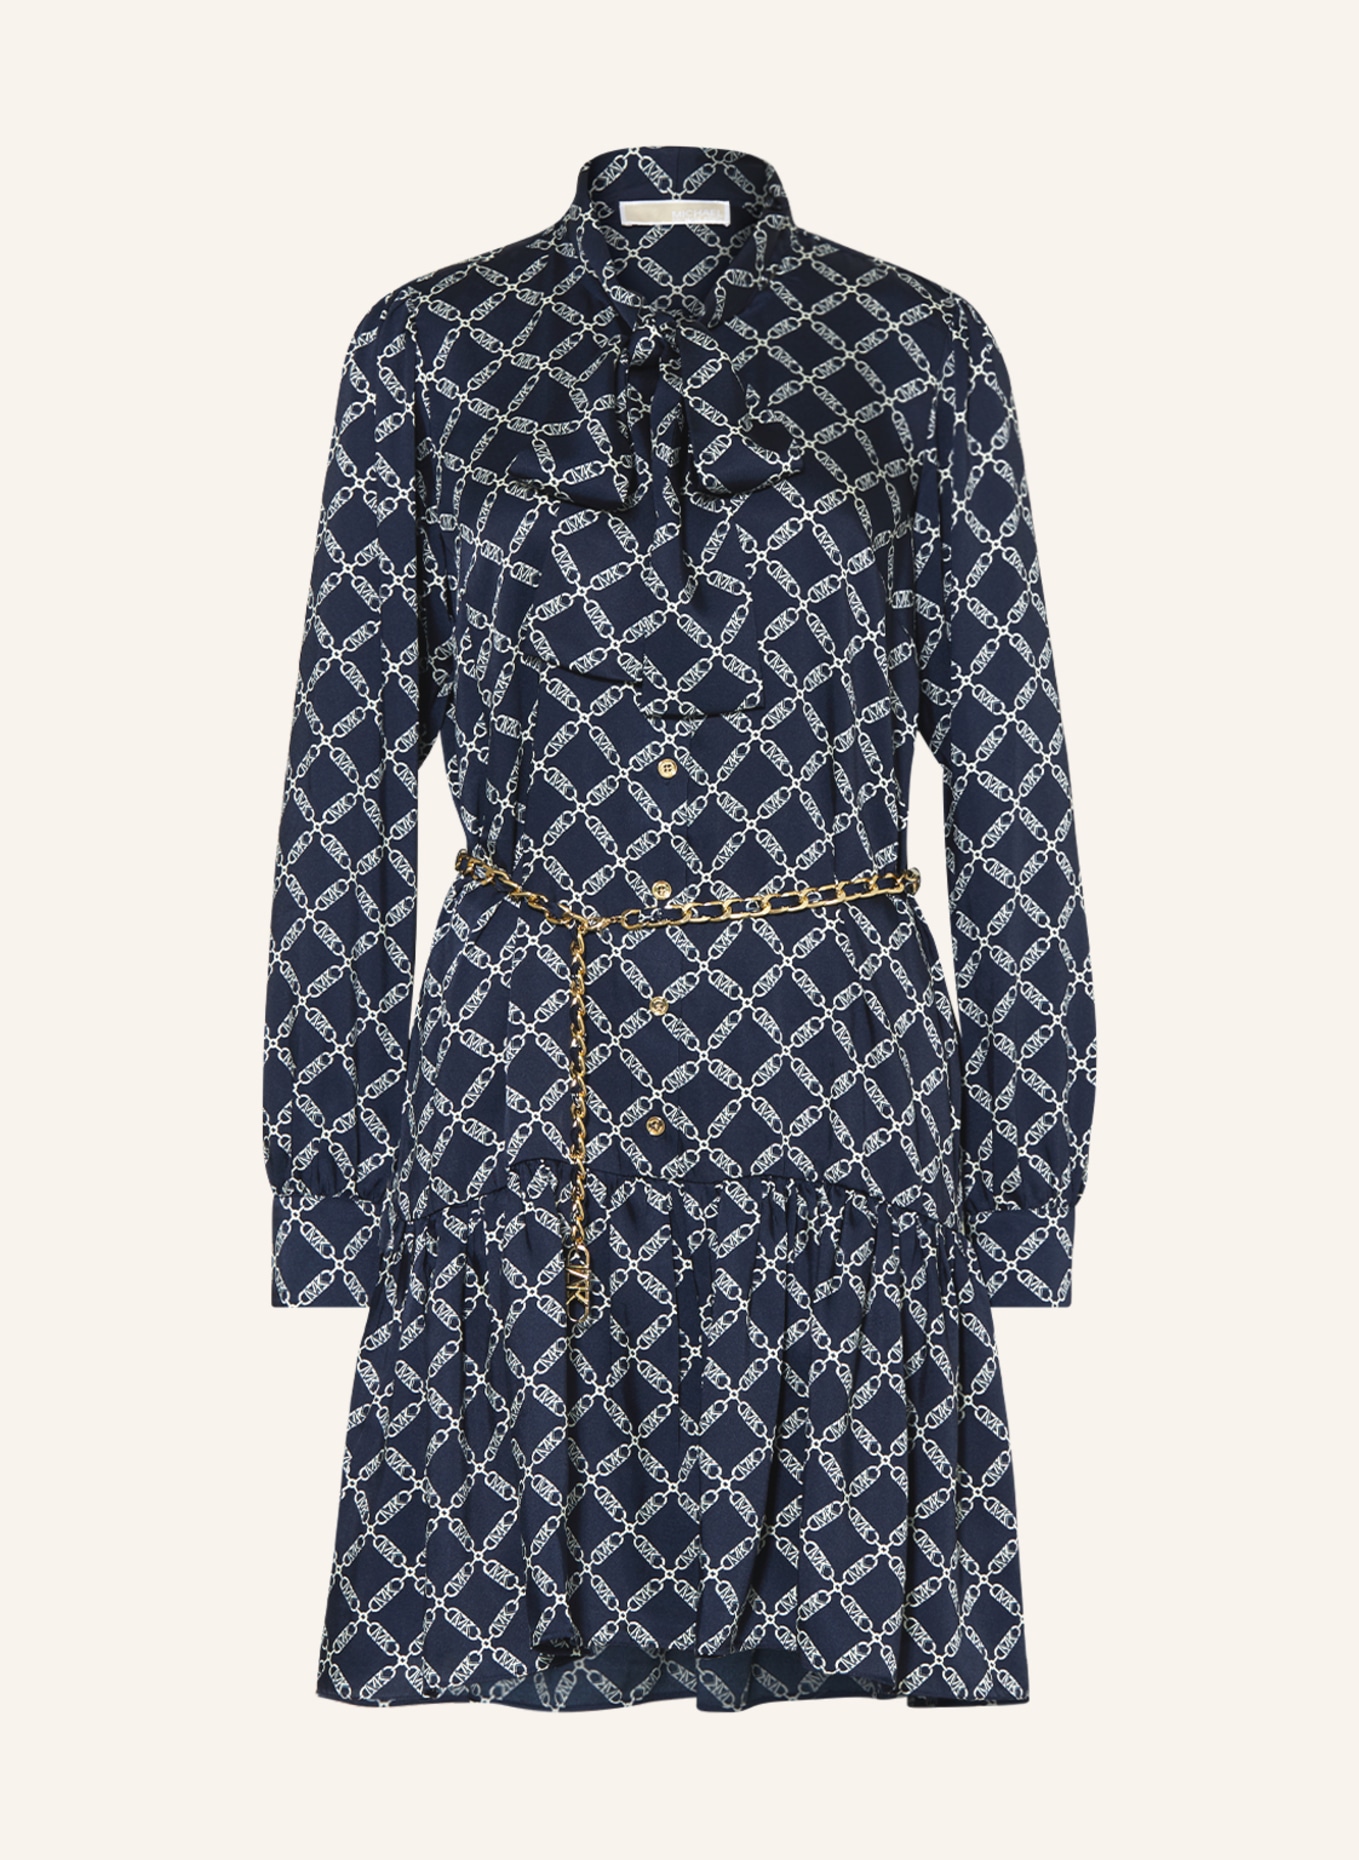 MICHAEL KORS Shirt dress with bow, Color: DARK BLUE/ WHITE (Image 1)